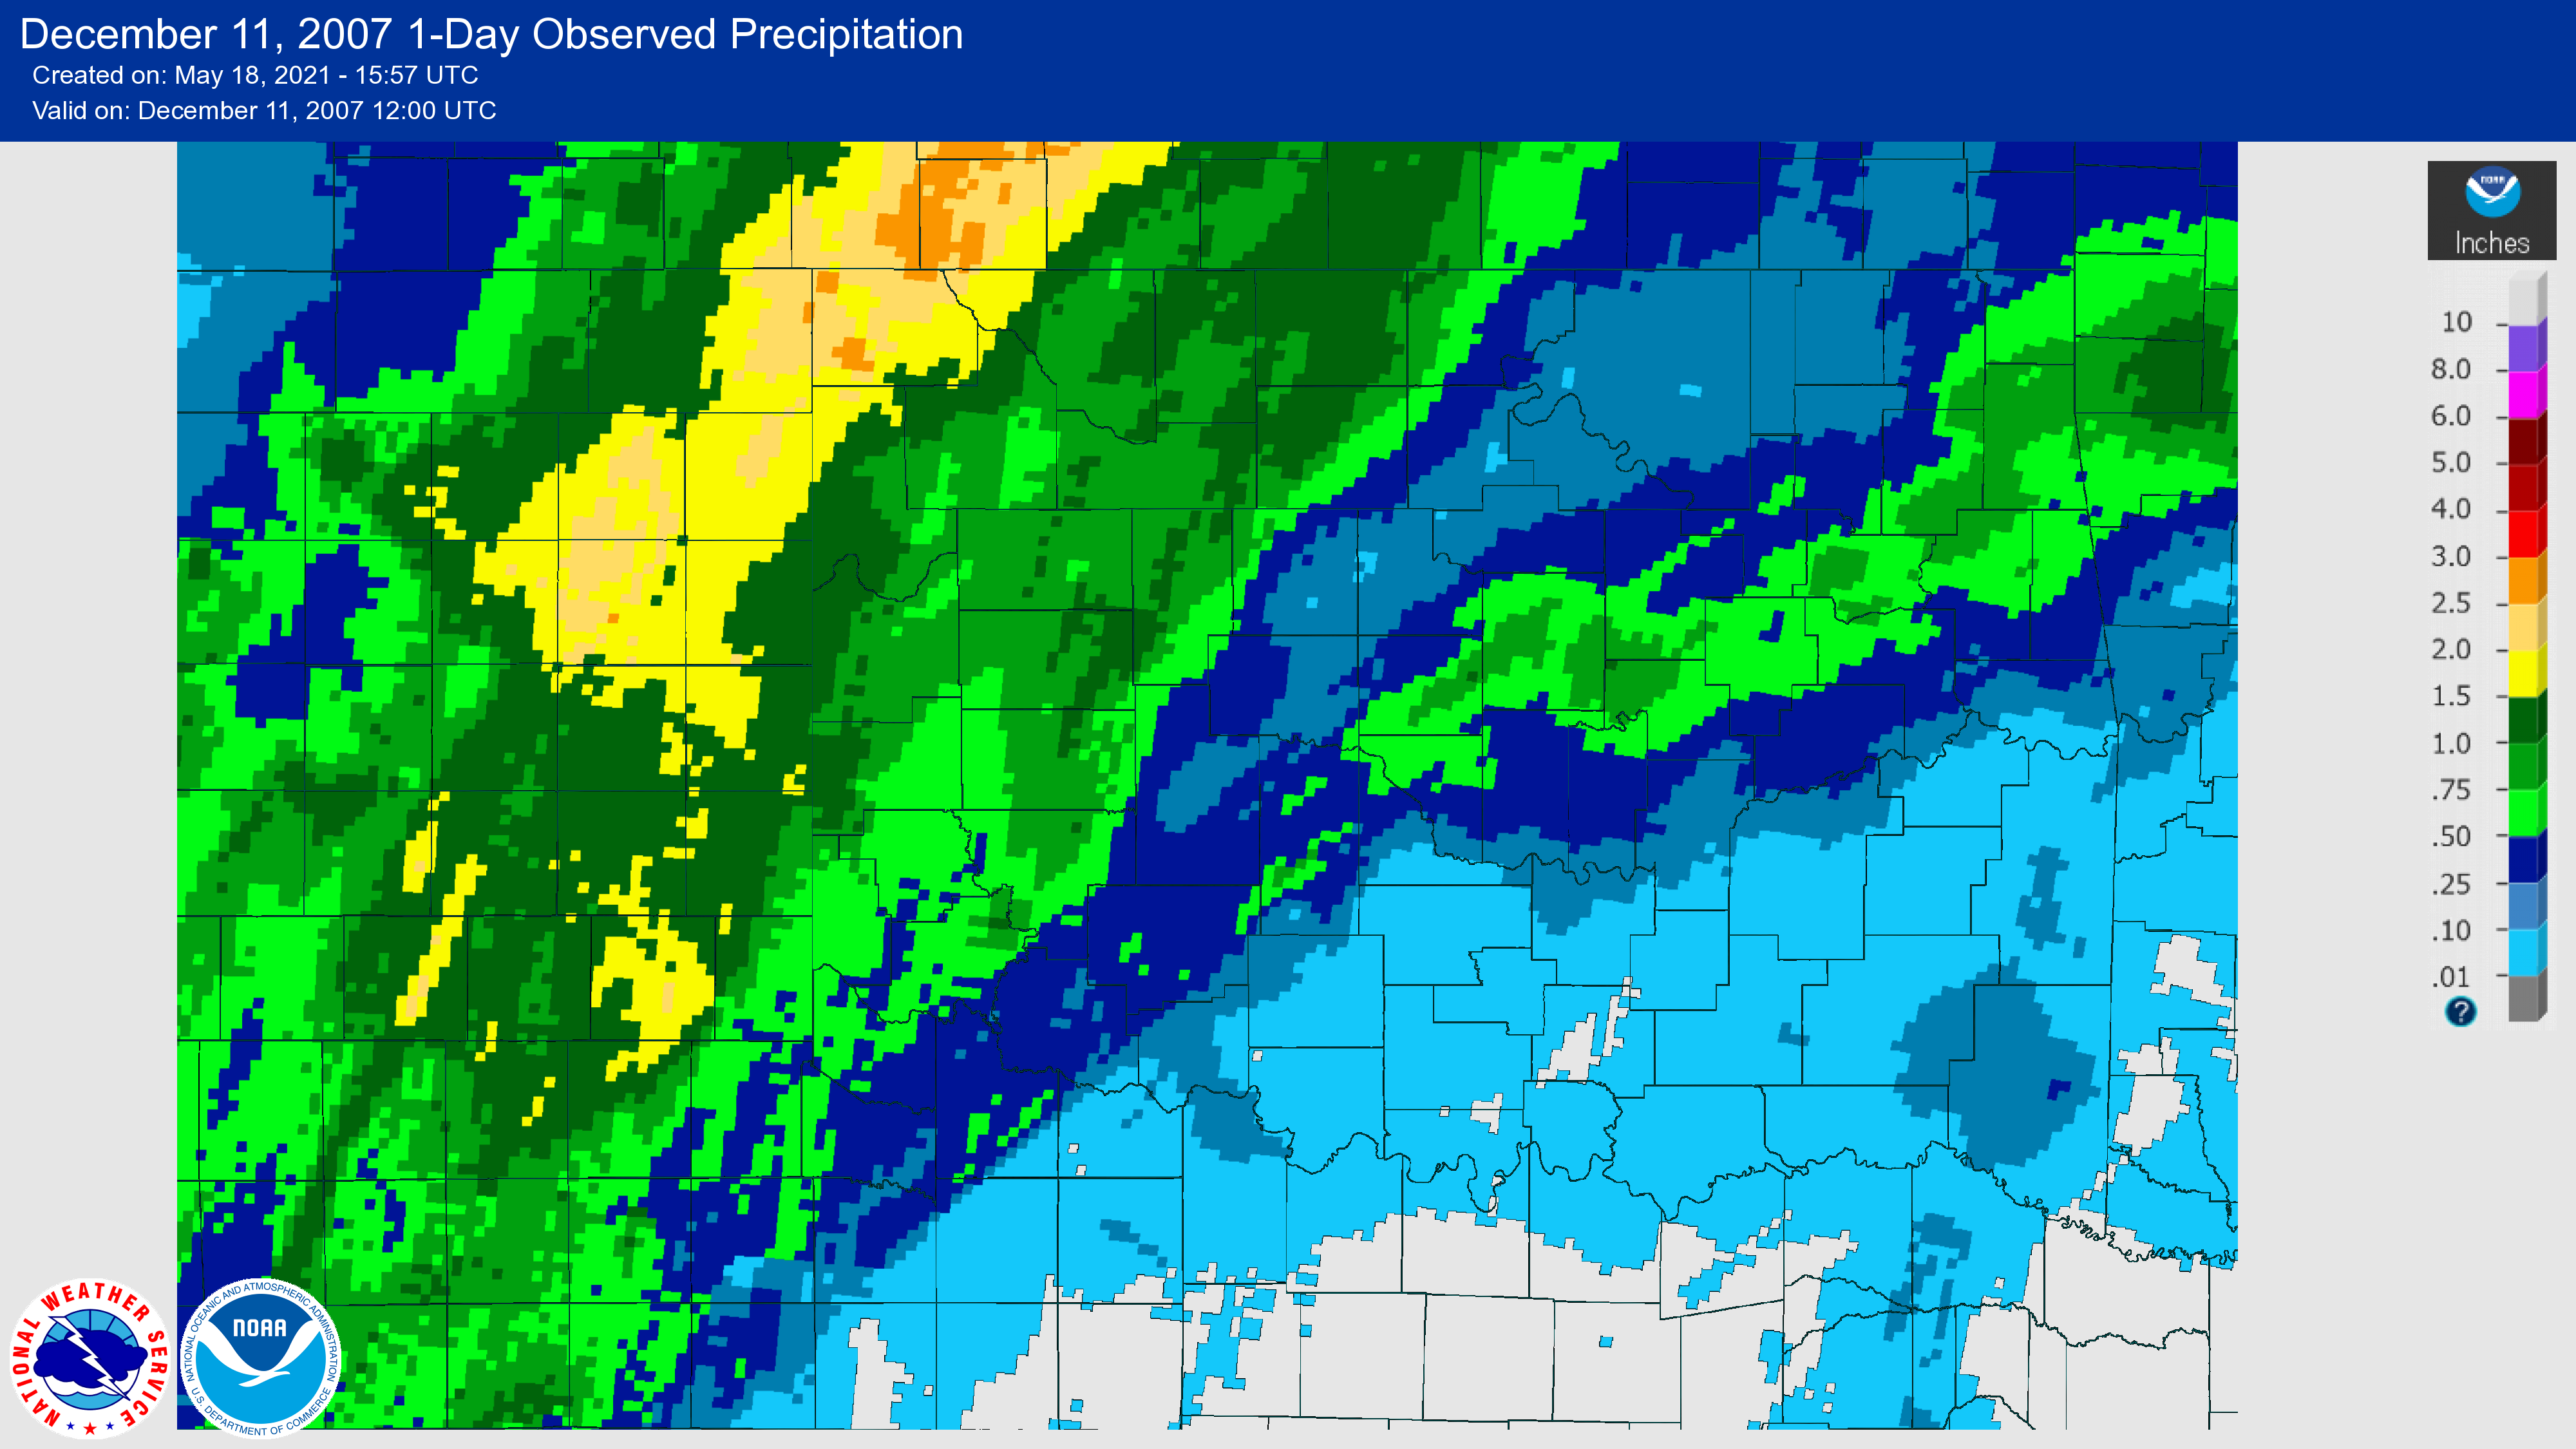 24-hour Precipitation Total ending at 6:00 AM CST on December 11, 2007 for the NWS Norman, Oklahoma Forecast Area